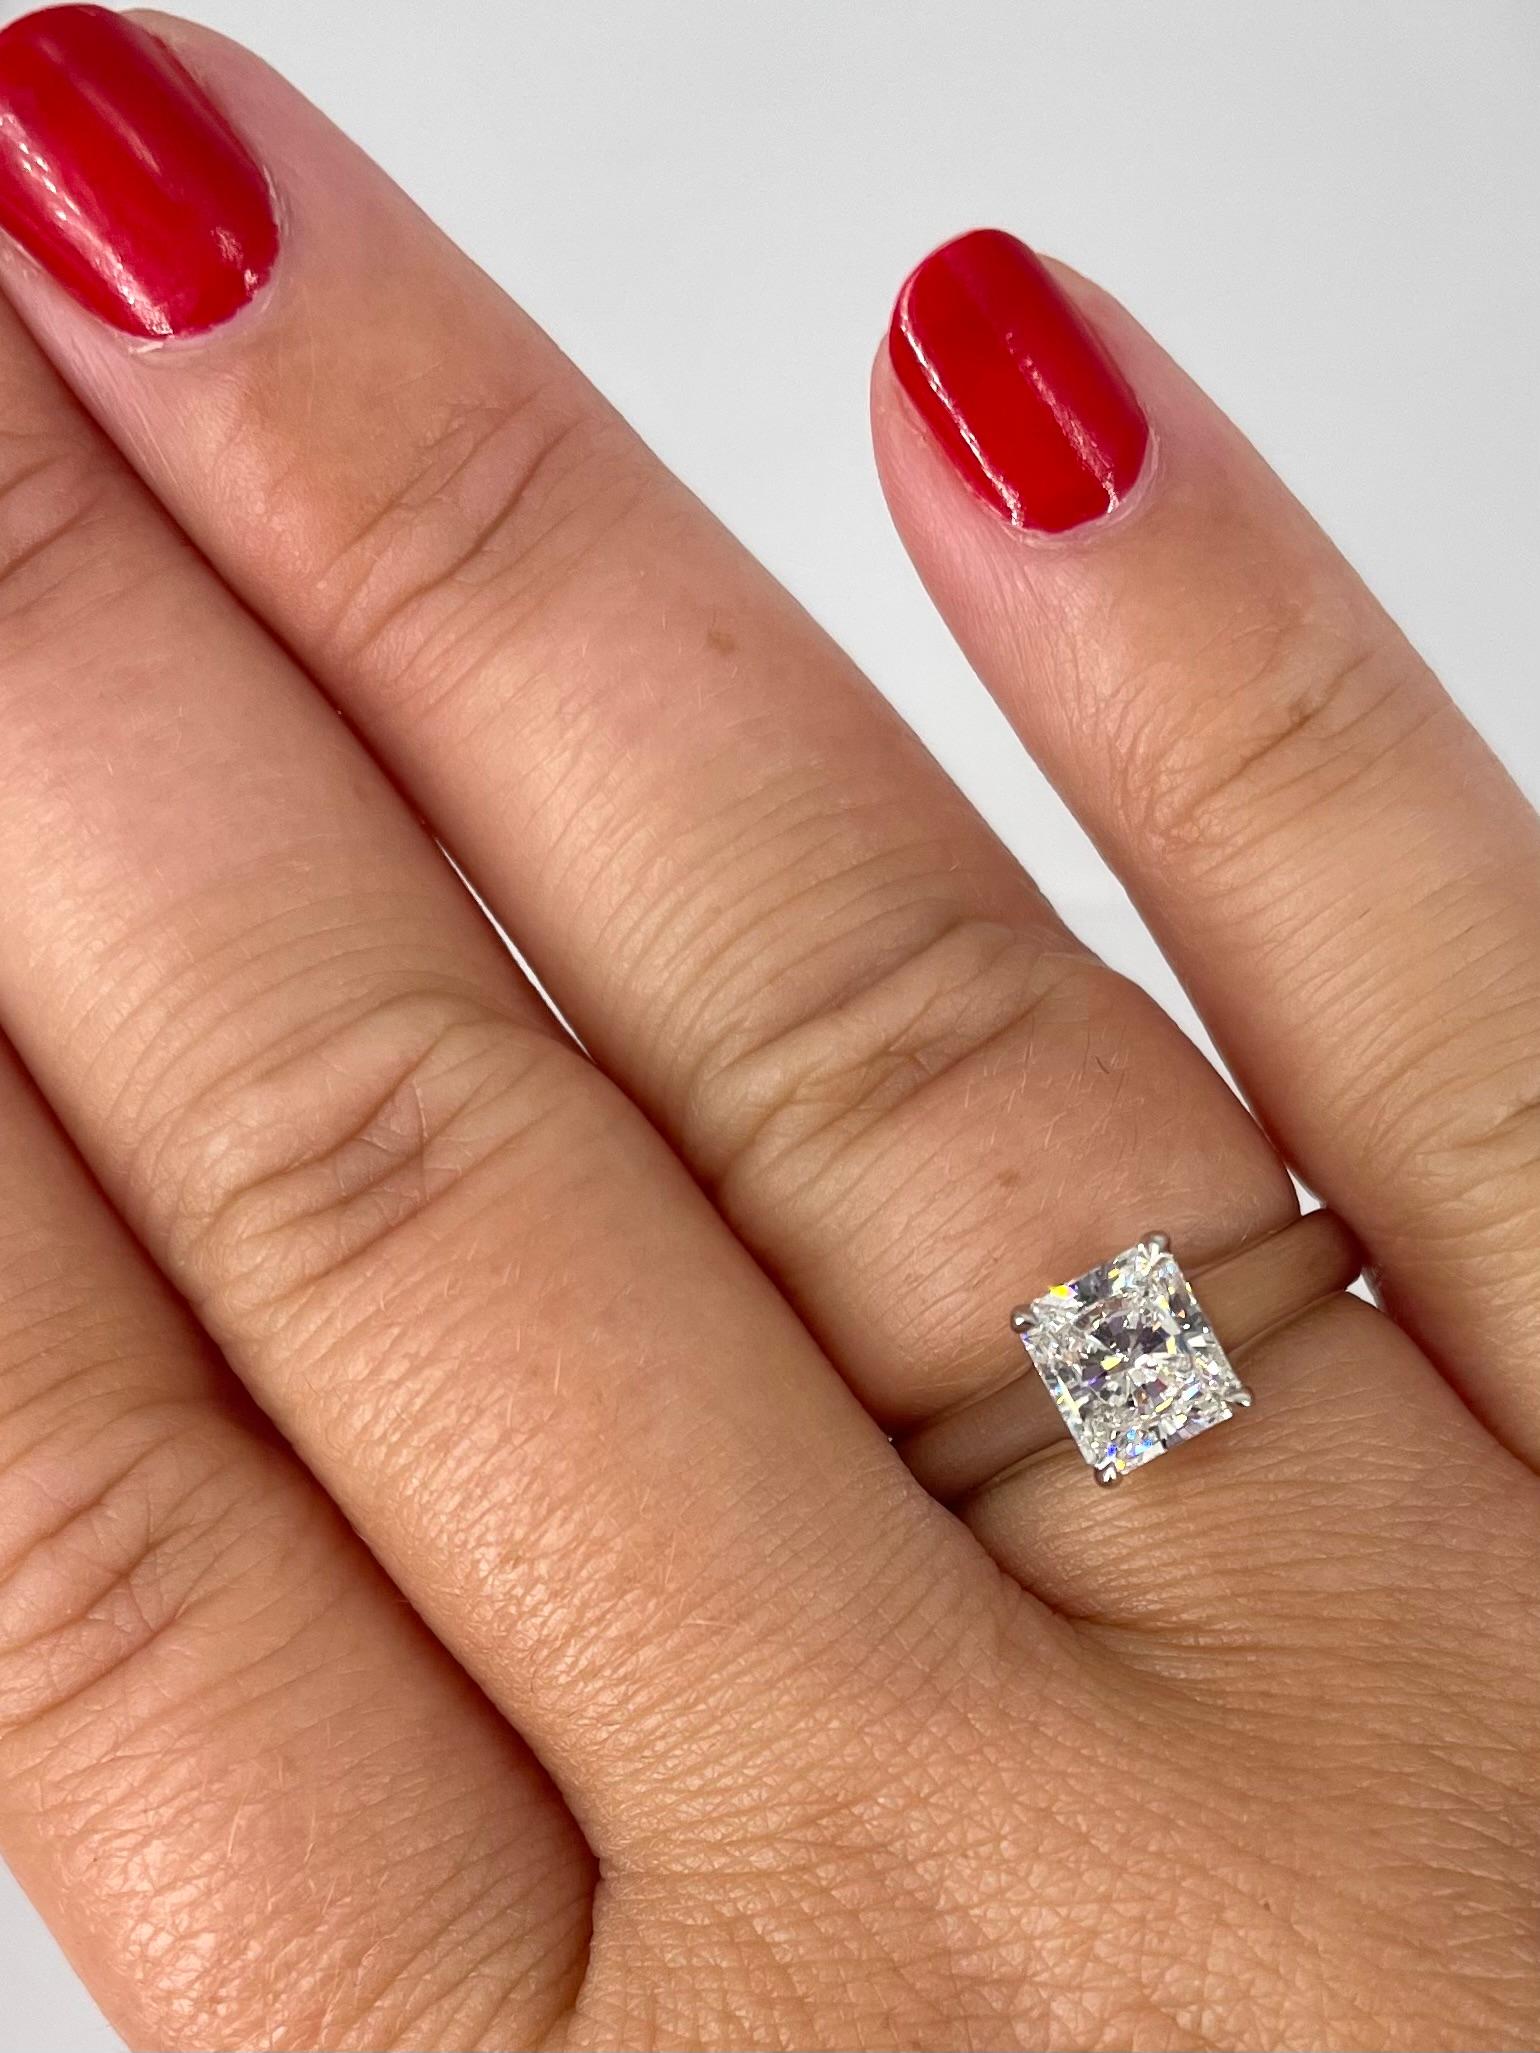 Tiffany & Co. 1.02 carat Radiant Cut Diamond Platinum Solitaire Engagement Ring  In Excellent Condition For Sale In New York, NY